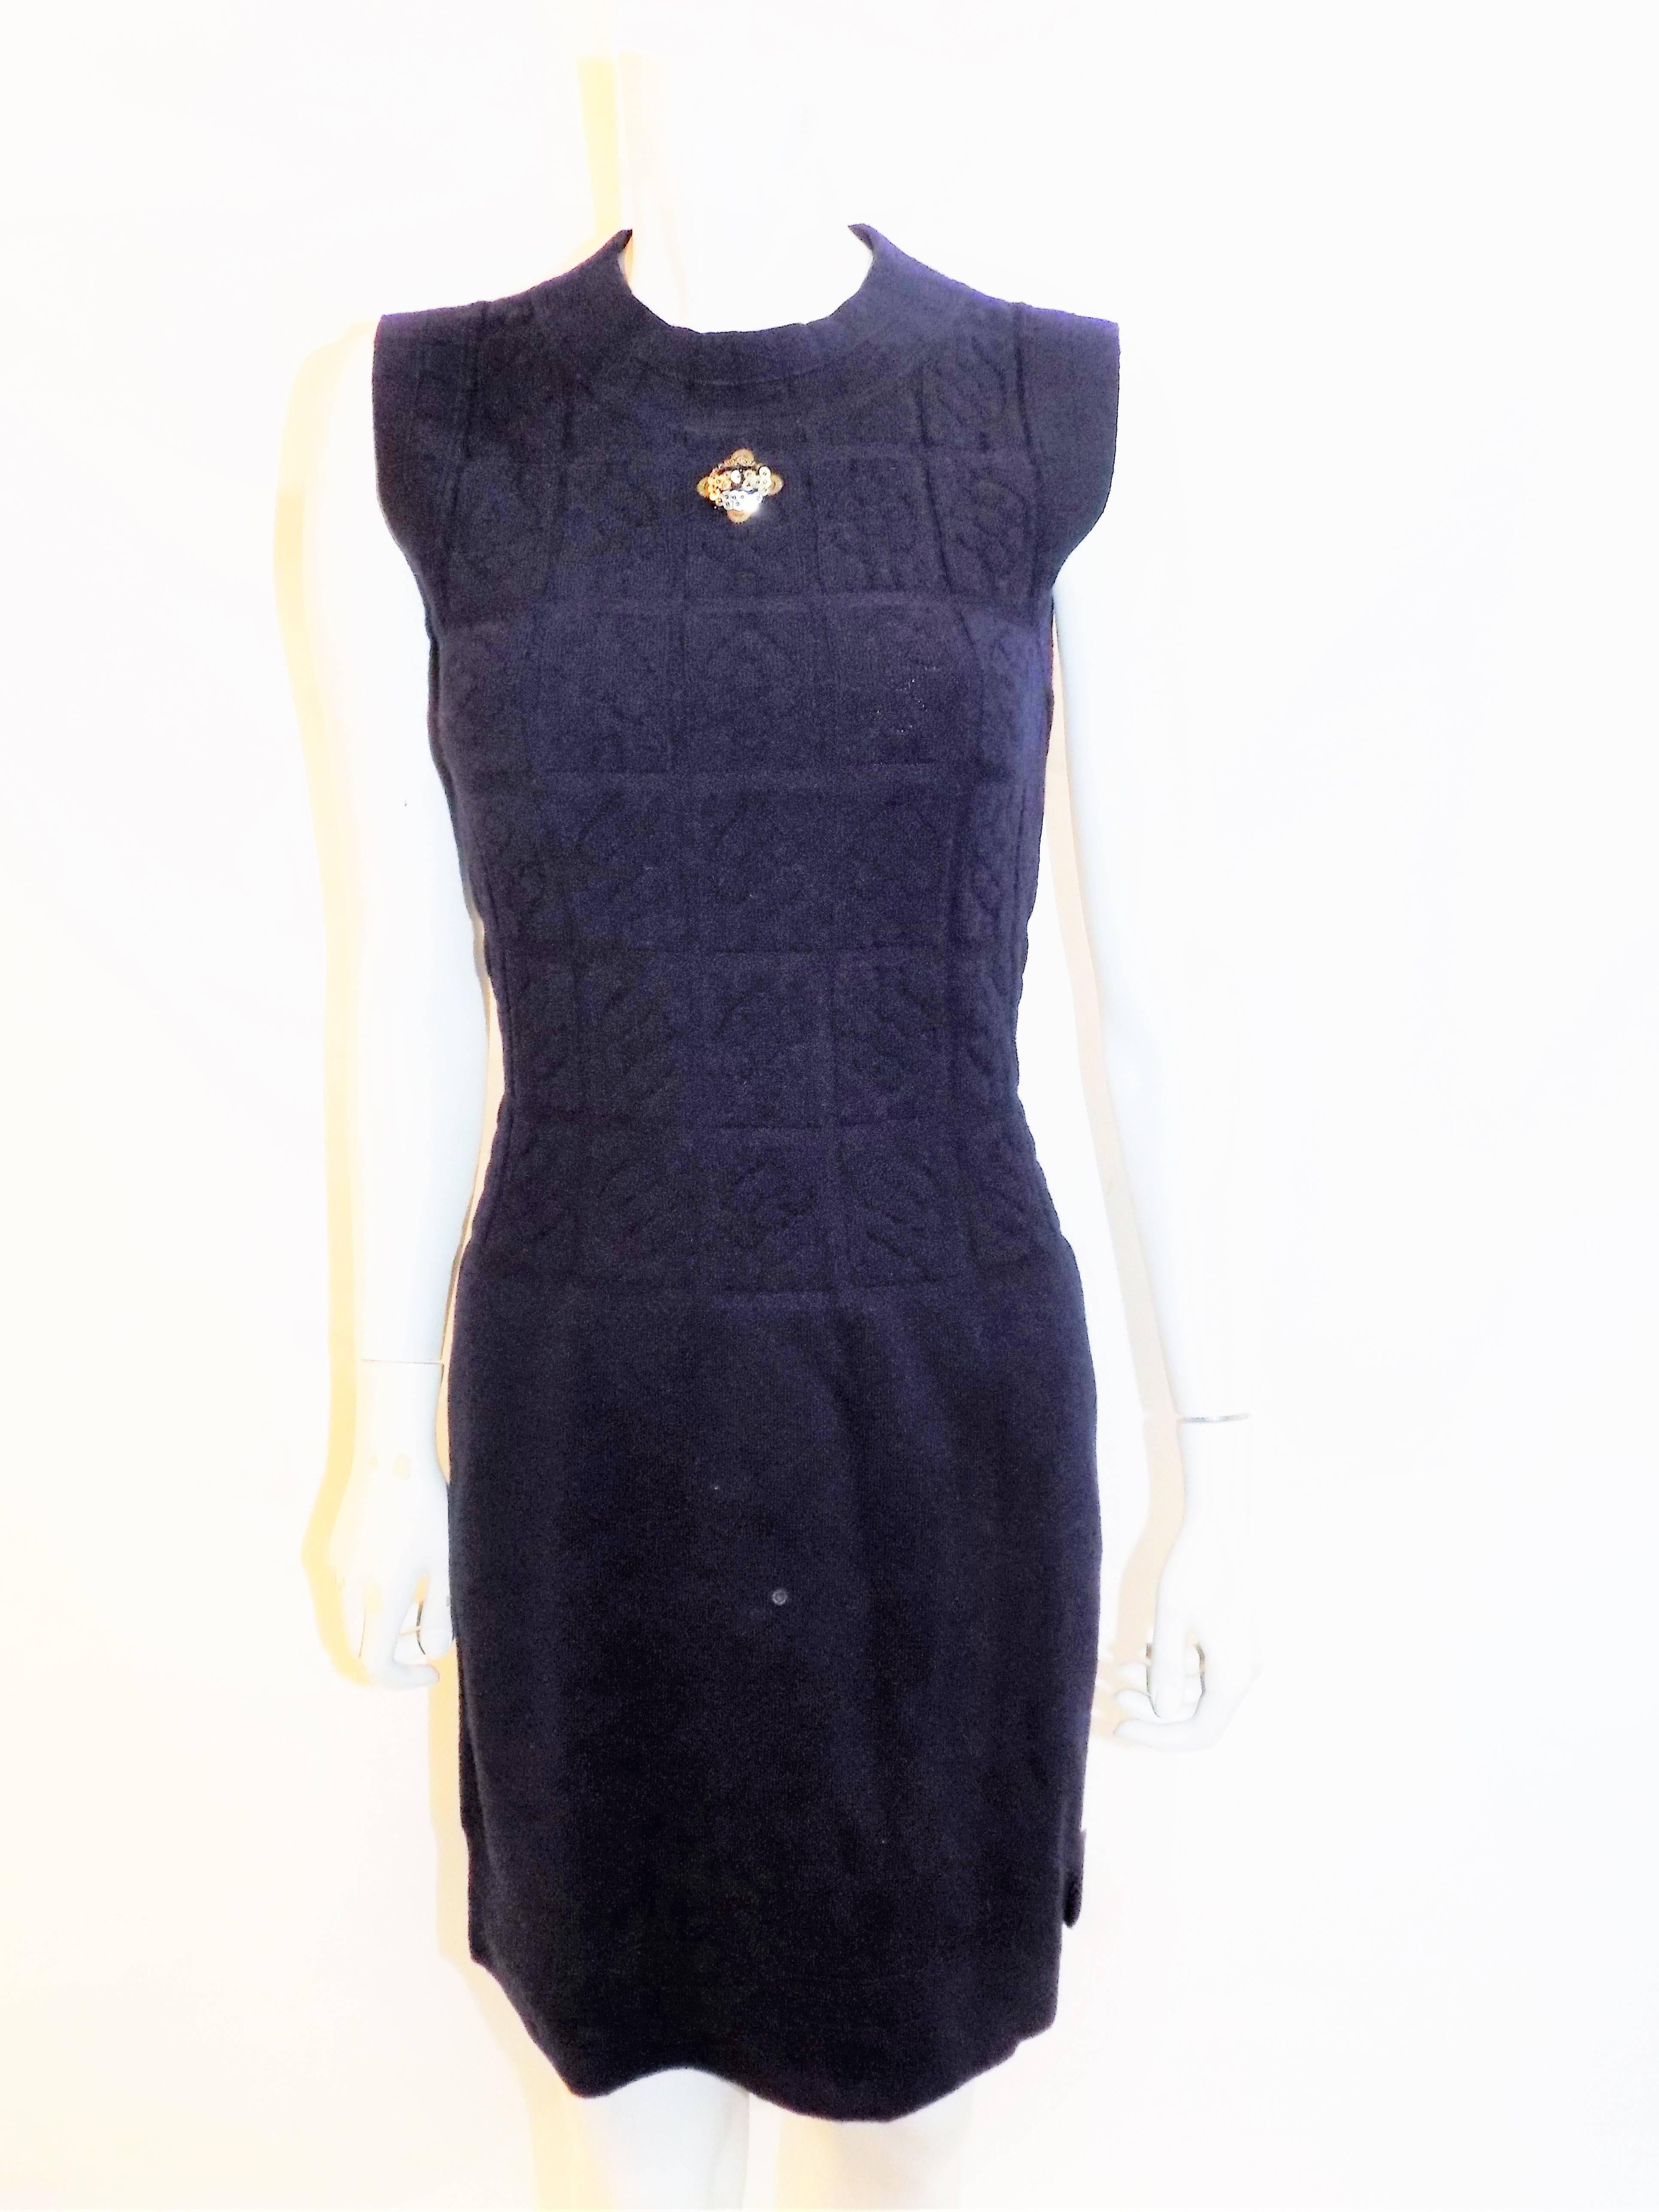 Fabulous and unique dark navy sleeveless dress and jacket set  by Chanel. Wool and cashmere blend., Raised /quilted style knit. Antique gold  ribbon trim  and stunning cc logo  Lesage patch at the front of the dress and the back of the jacket.